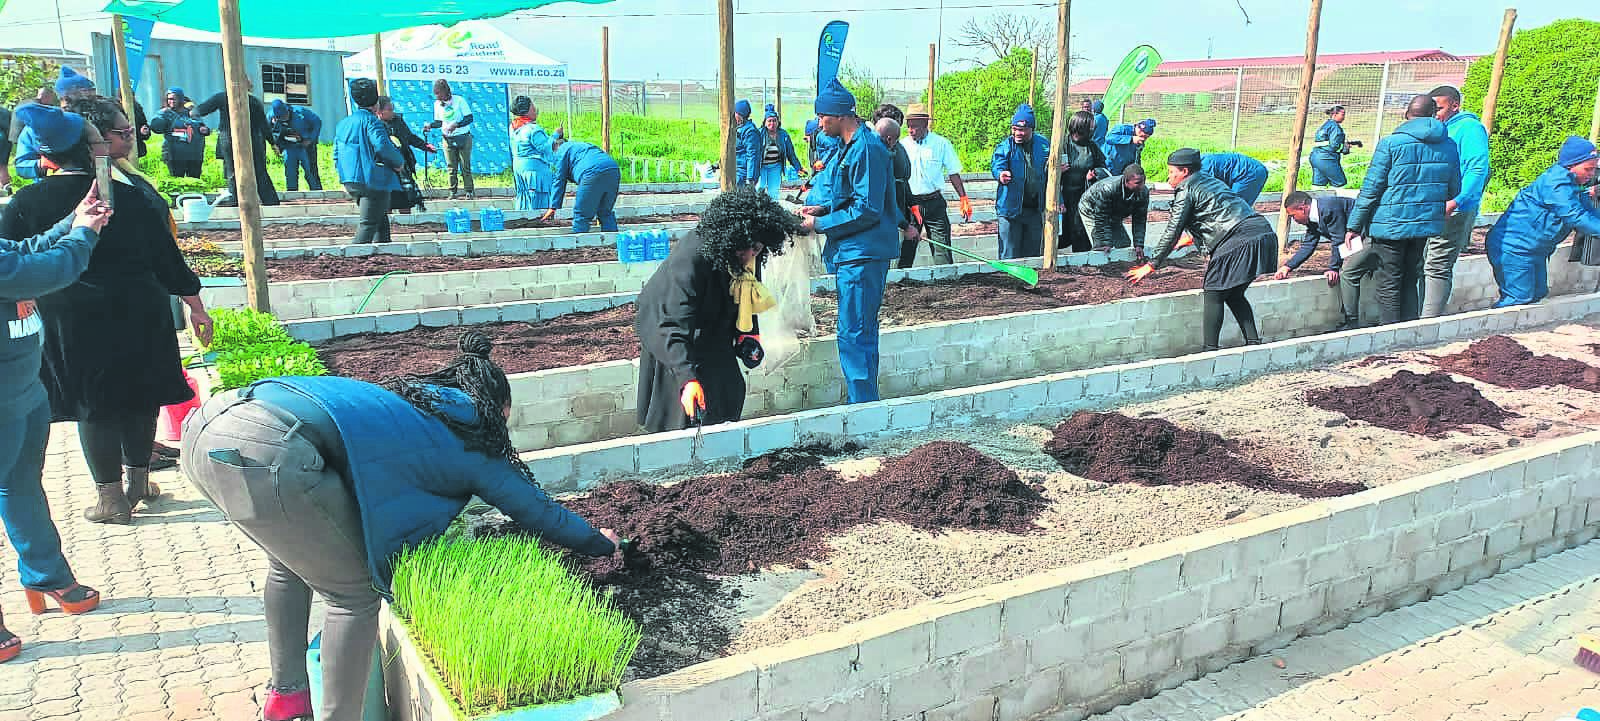 The Road Accident Fund team help by planting vegetables at the Khayelitsha Special School on Wednesday 3 August.PHOTO: SUPPLIED